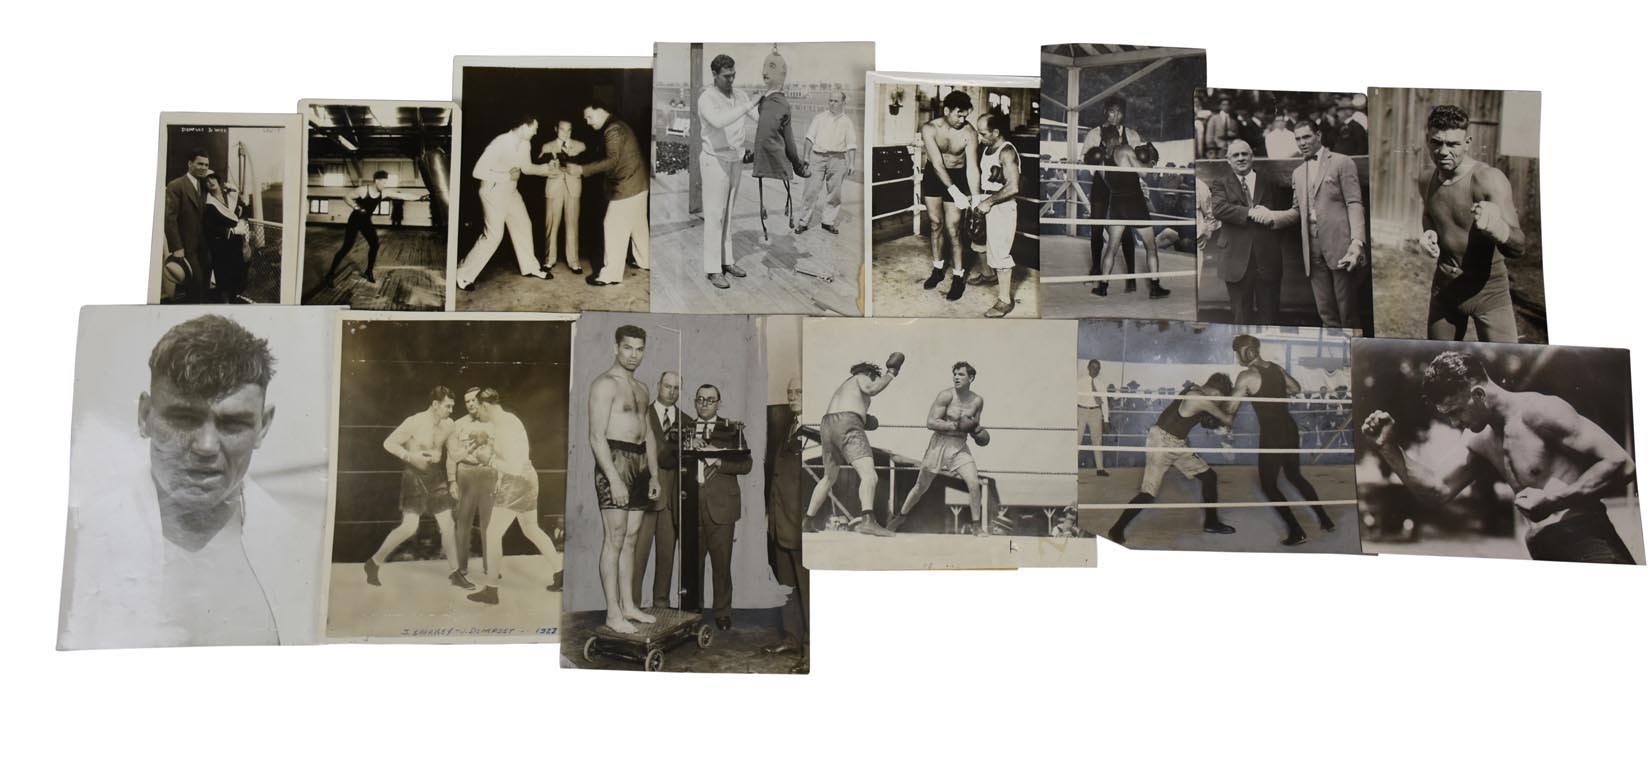 Muhammad Ali & Boxing - Early Jack Dempsey Photographs & Postcard Collection (43)